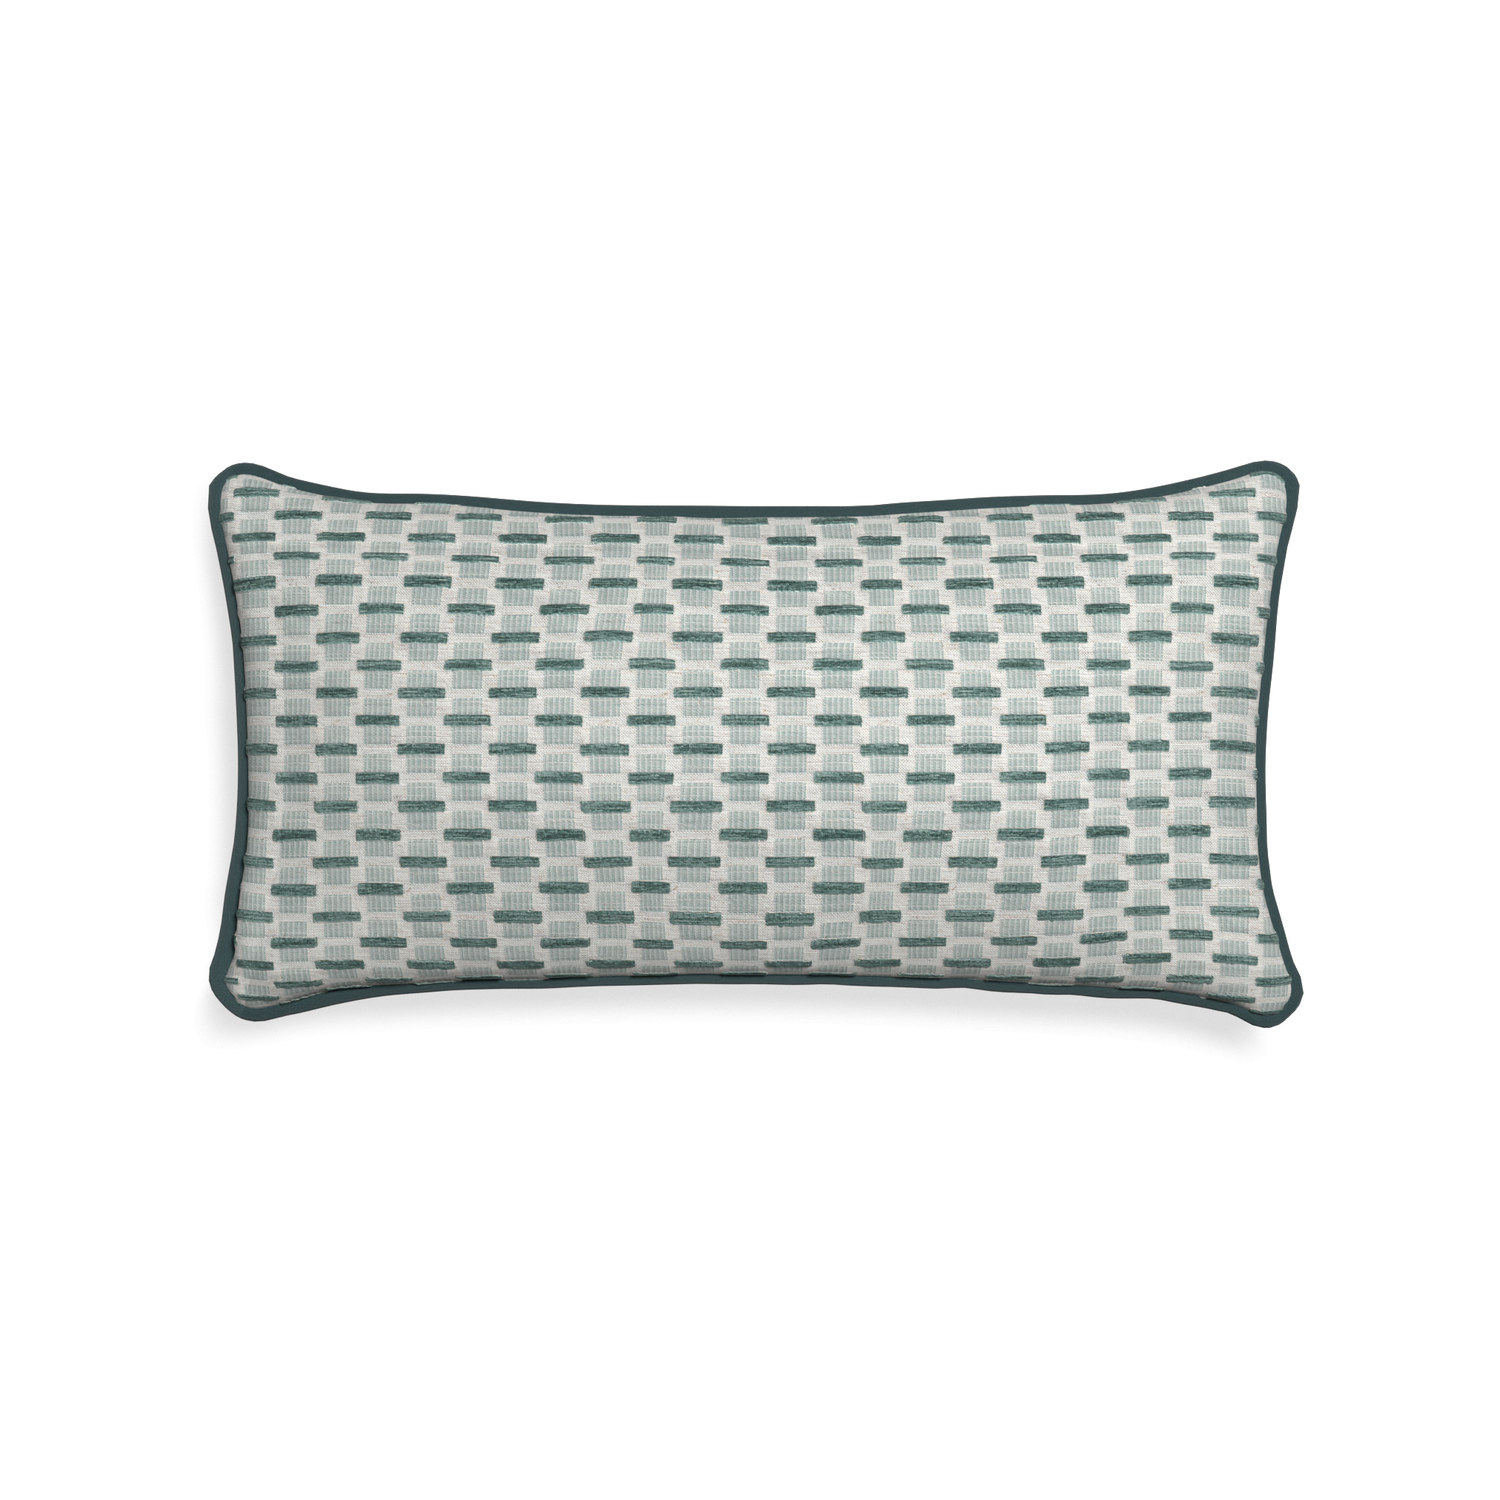 Midi-lumbar willow mint custom green geometric chenillepillow with p piping on white background